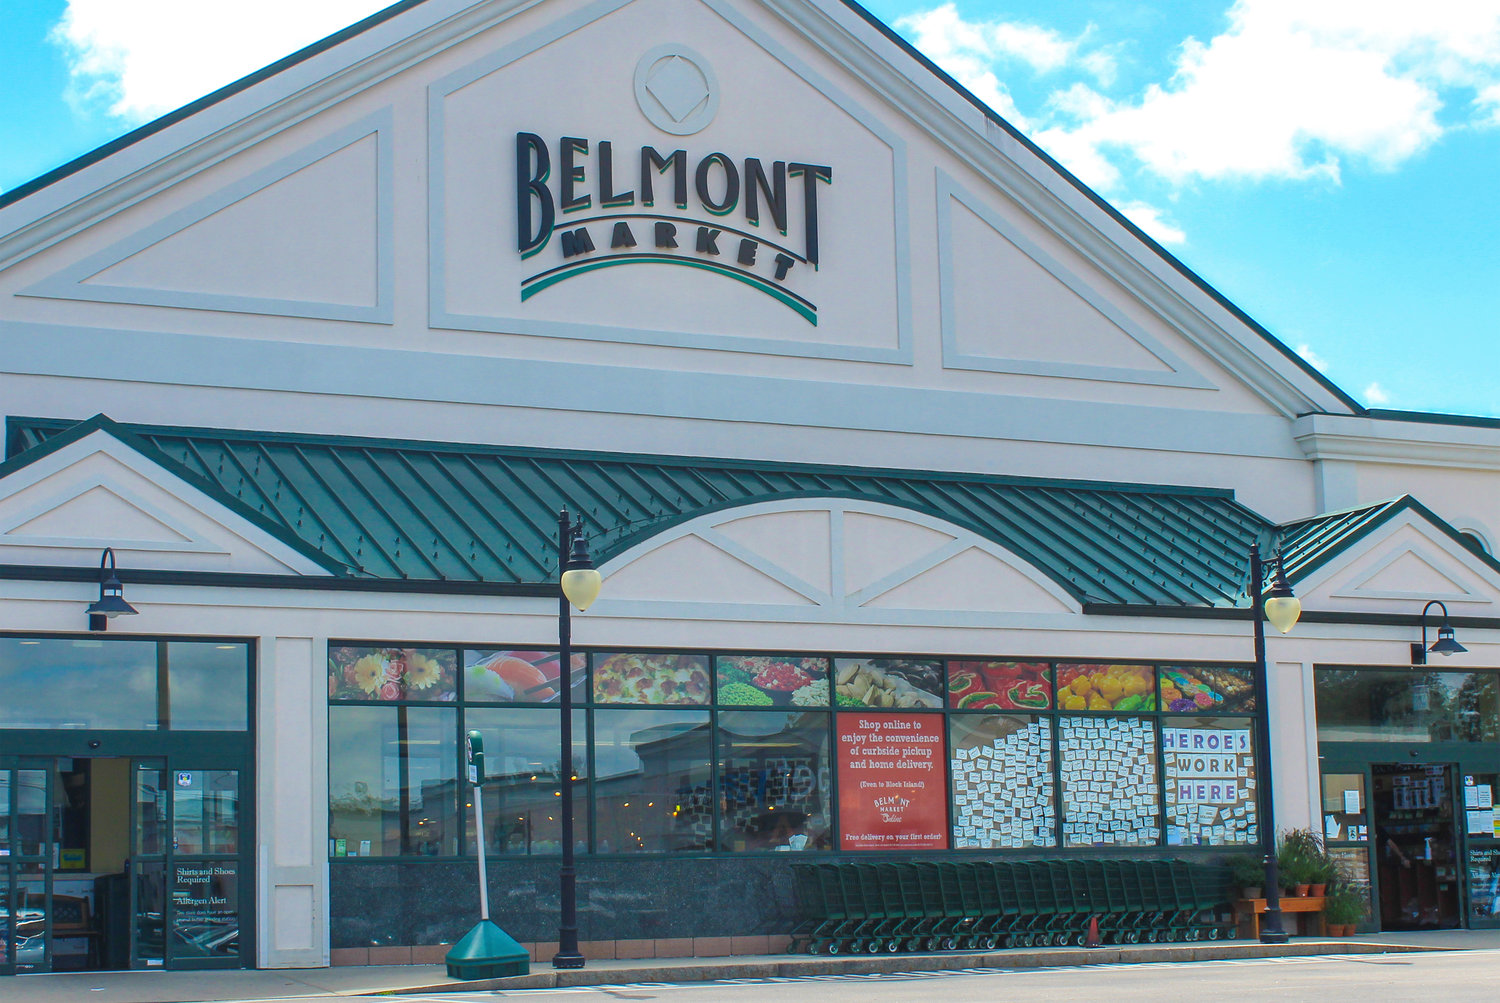 Local grocer Belmont Market looks at adapting to dorm 
delivery to sustain the 
returning student population